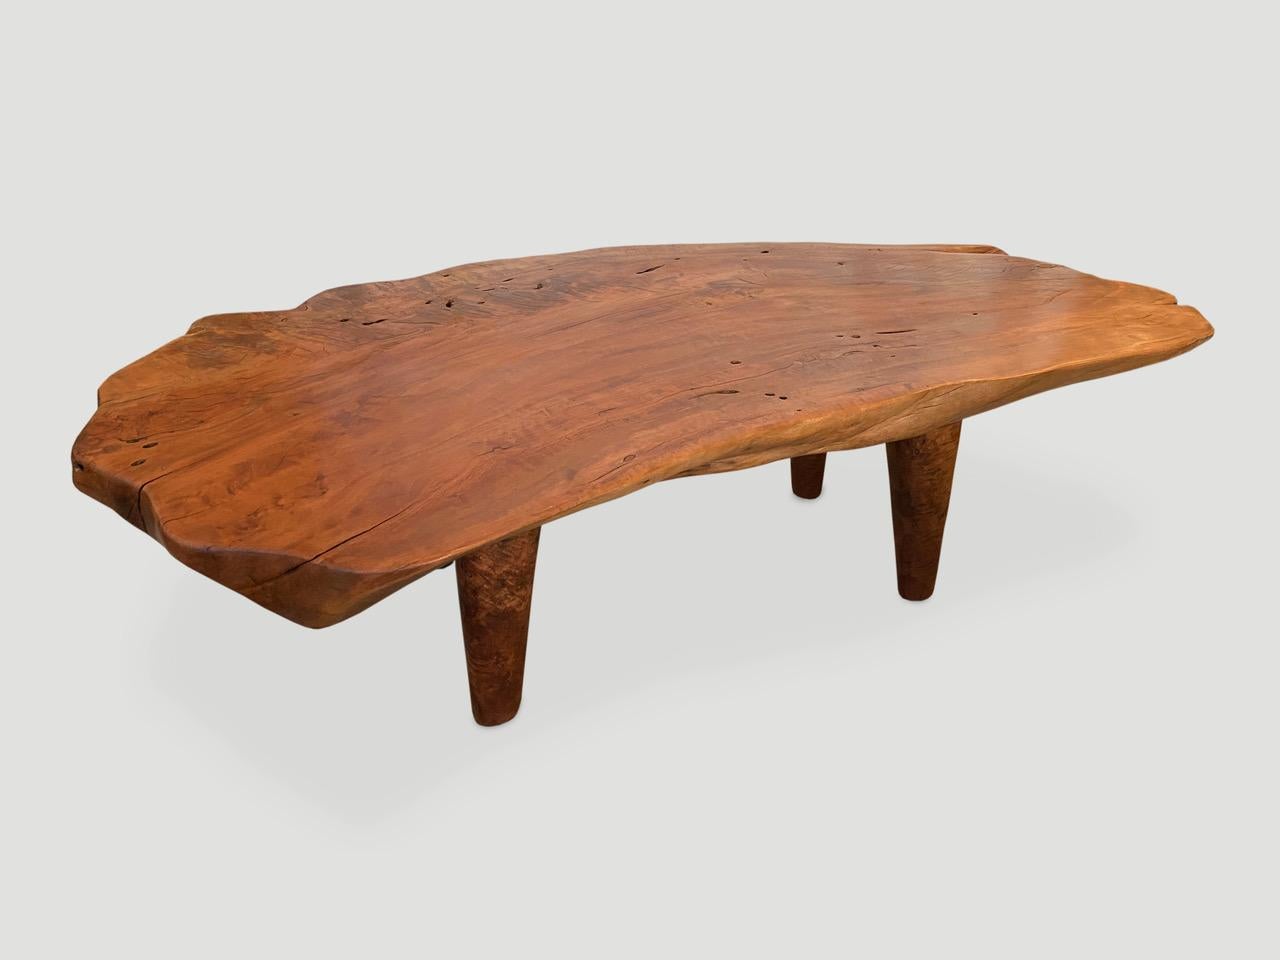 Reclaimed four inch thick lychee wood coffee table with a natural oil finish. Floating on midcentury style legs. Organic with a twist.

Own an Andrianna Shamaris original.

Andrianna Shamaris. The Leader In Modern Organic Design.